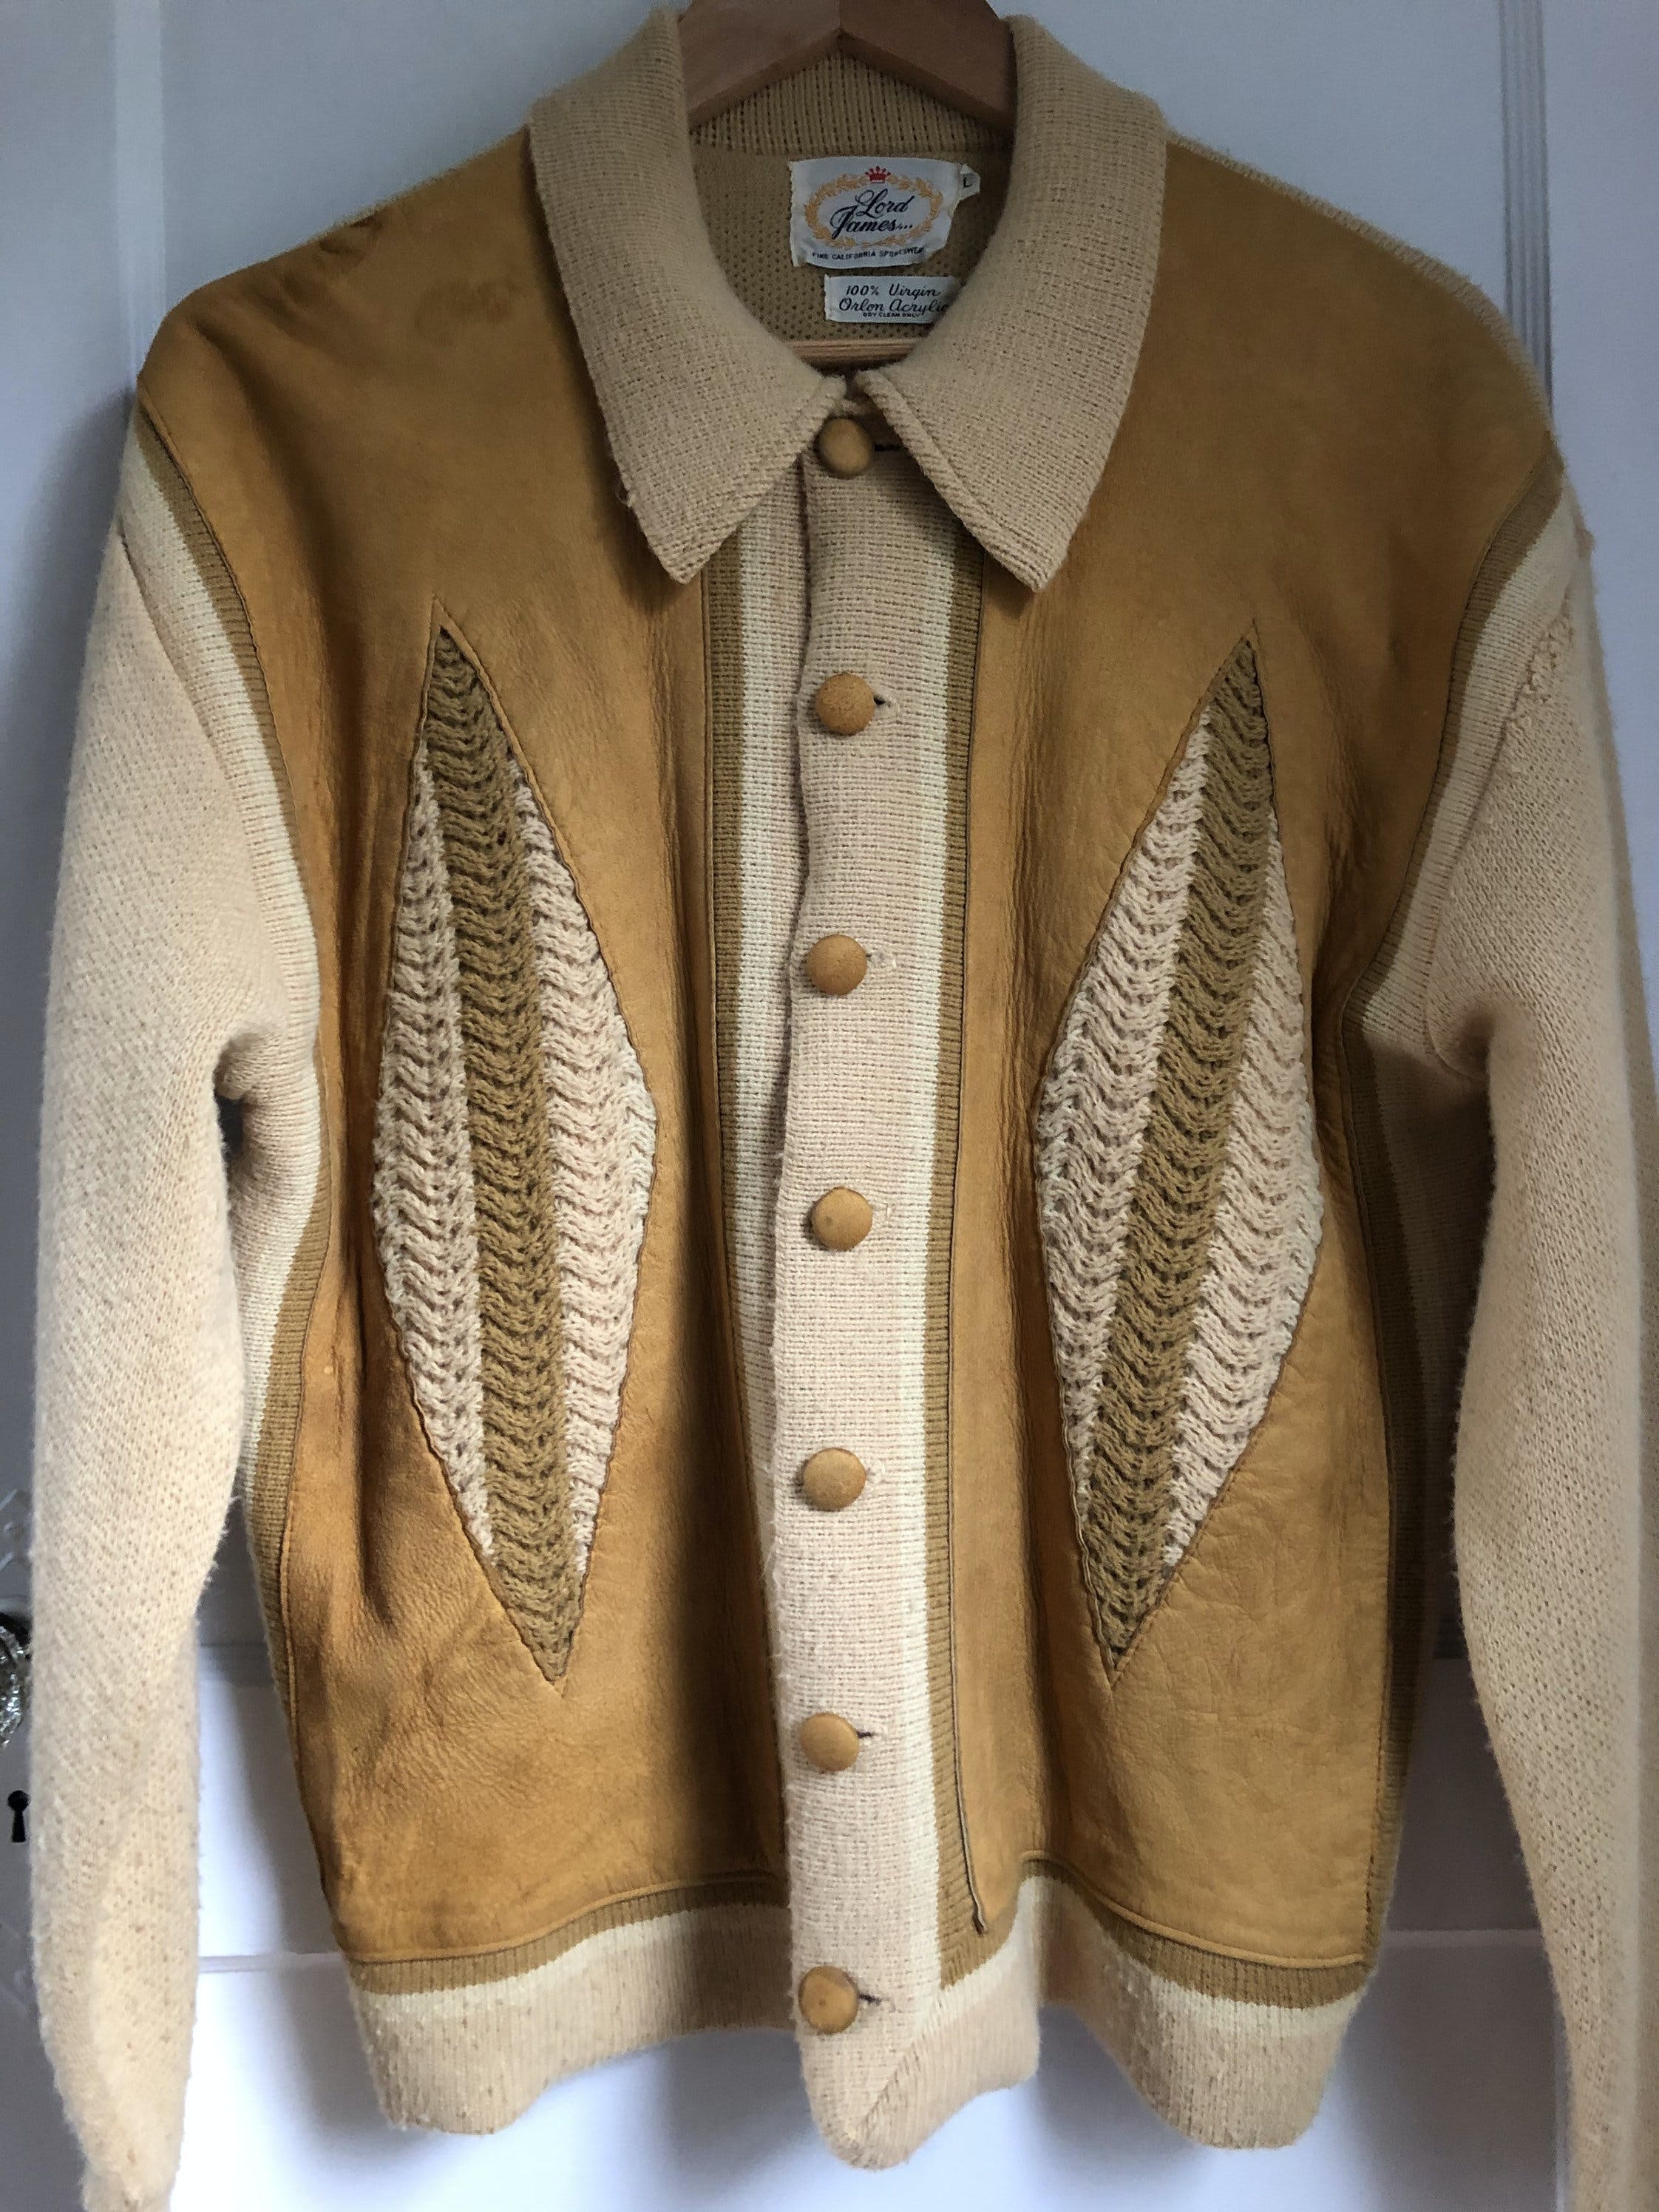 Vintage 60’s Beige Knit Acrylic and Suede Collared Cardigan Sweater ...